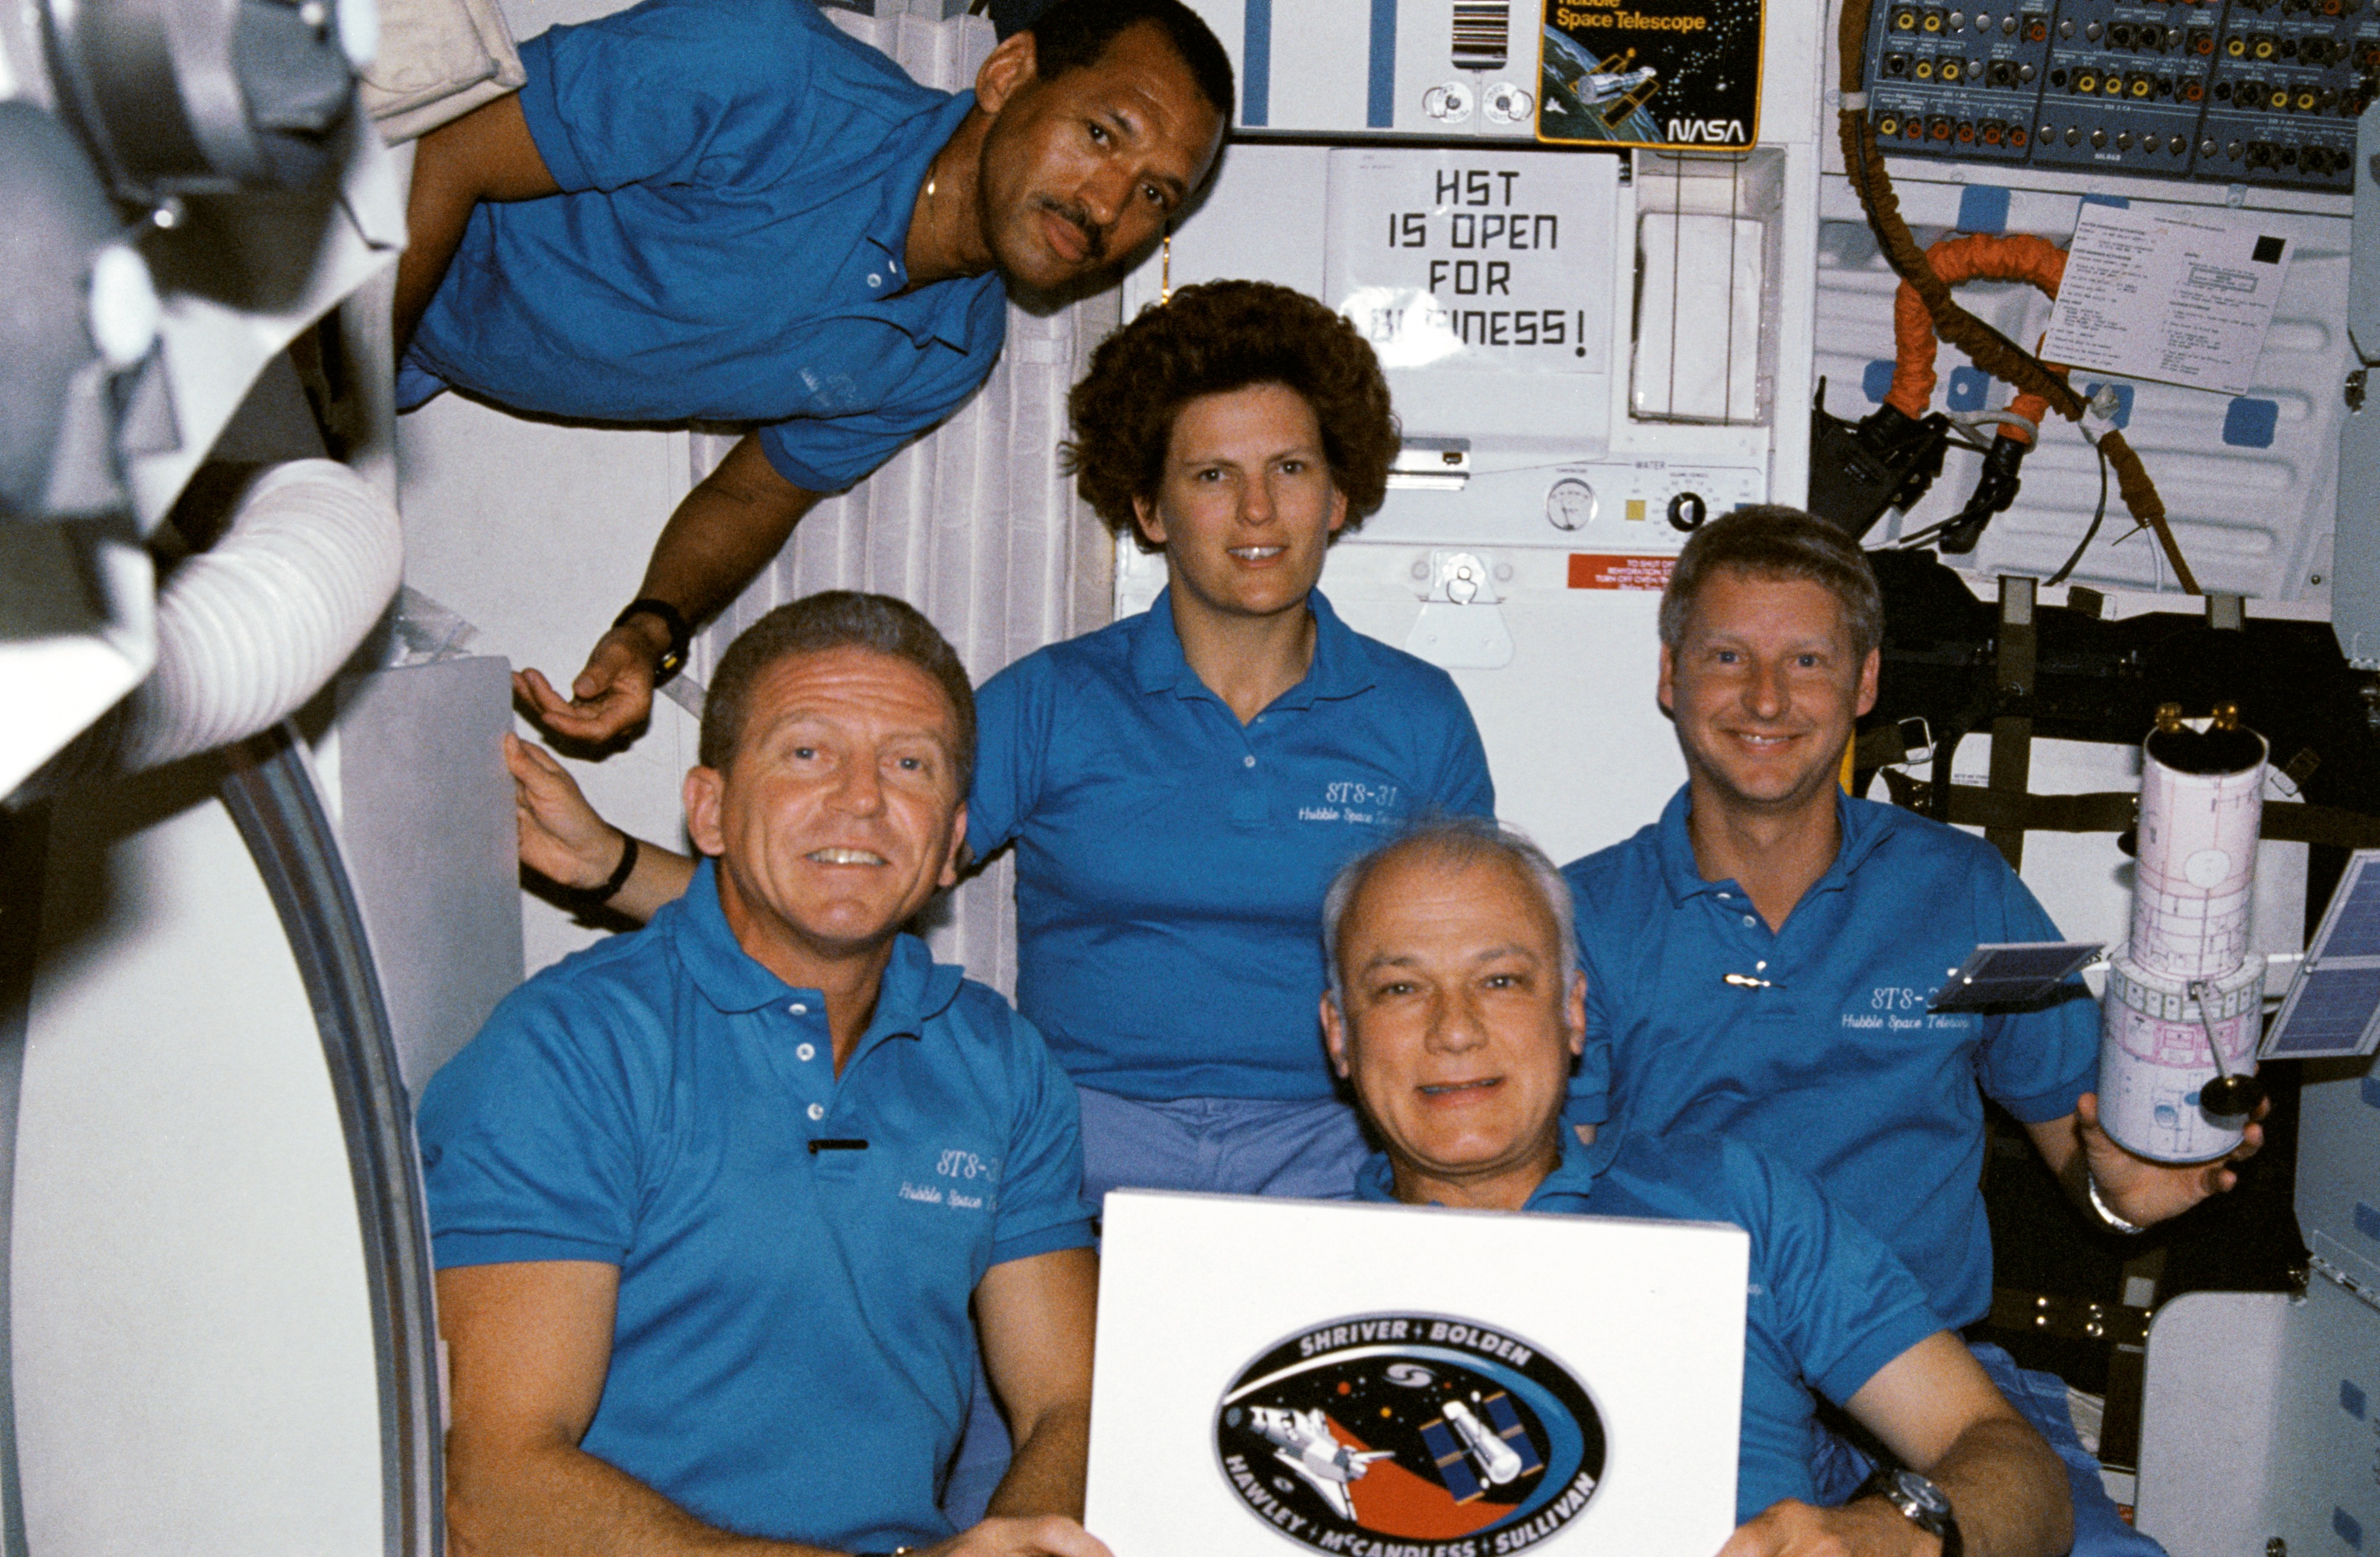 The STS-31 crew poses for a photo in the crew cabin in front of a sign that says "HST IS OPEN FOR BUSINESS!"